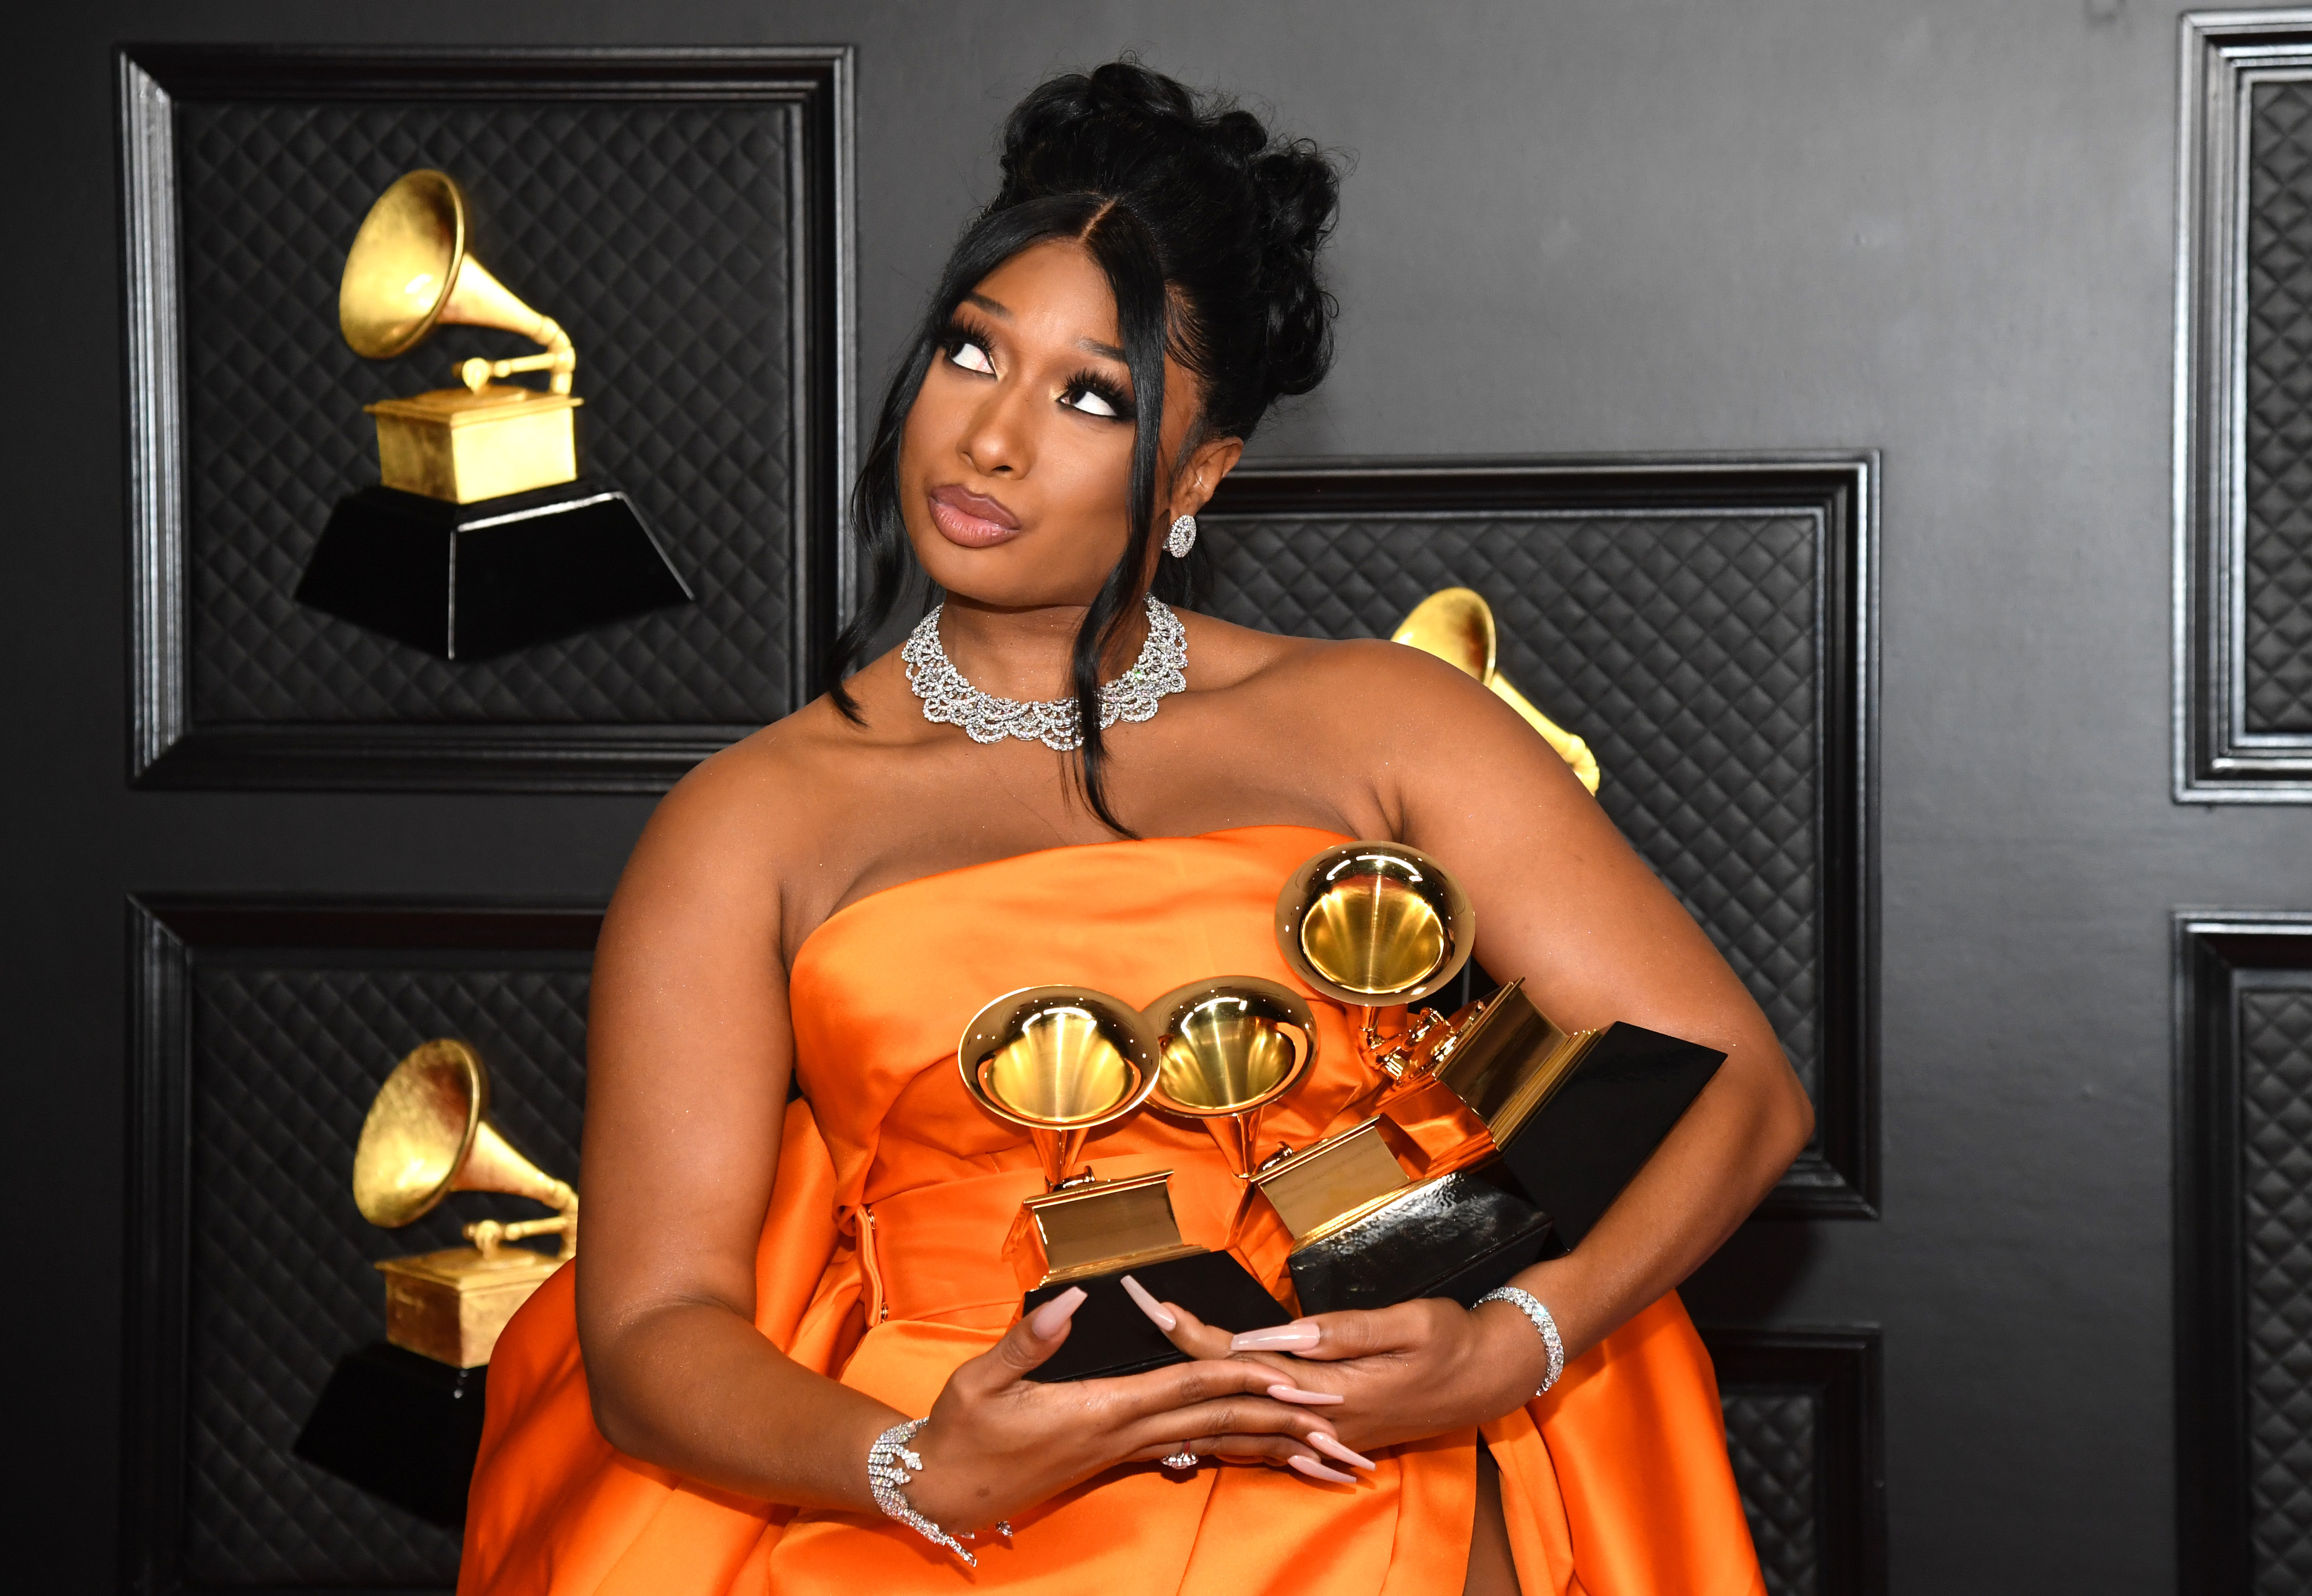 Megan Thee Stallion, winner of the Best Rap Performance and Best Rap Song awards for 'Savage' and the Best New Artist award